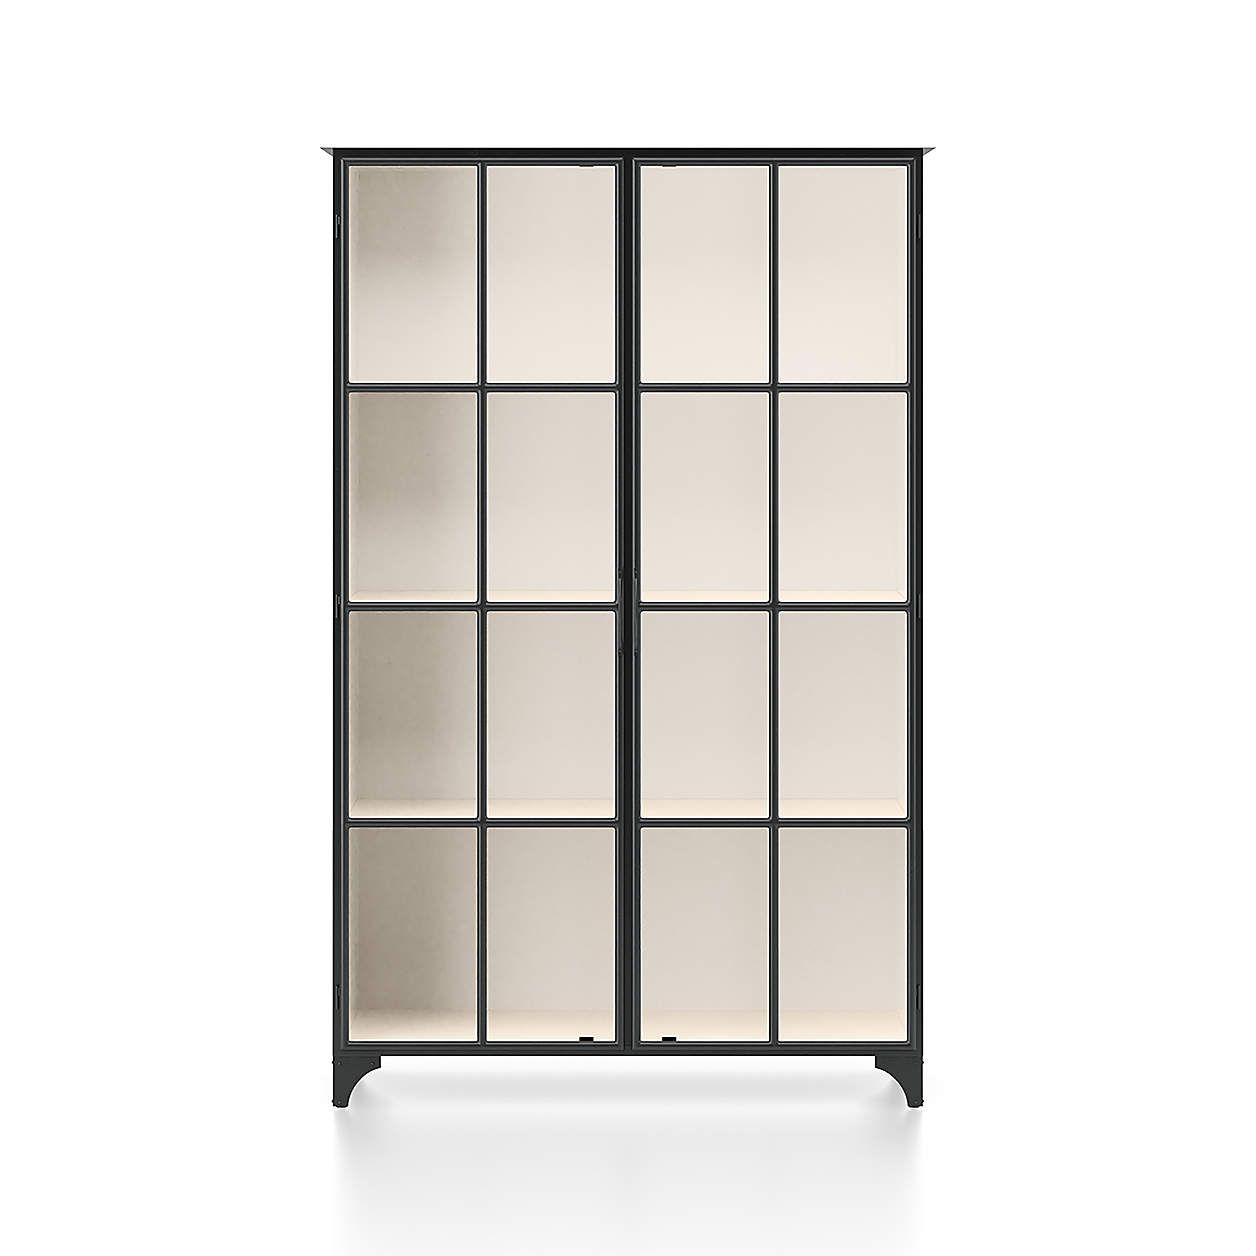 Kedzie Black-and-White Cabinet + Reviews | Crate and Barrel | Crate & Barrel